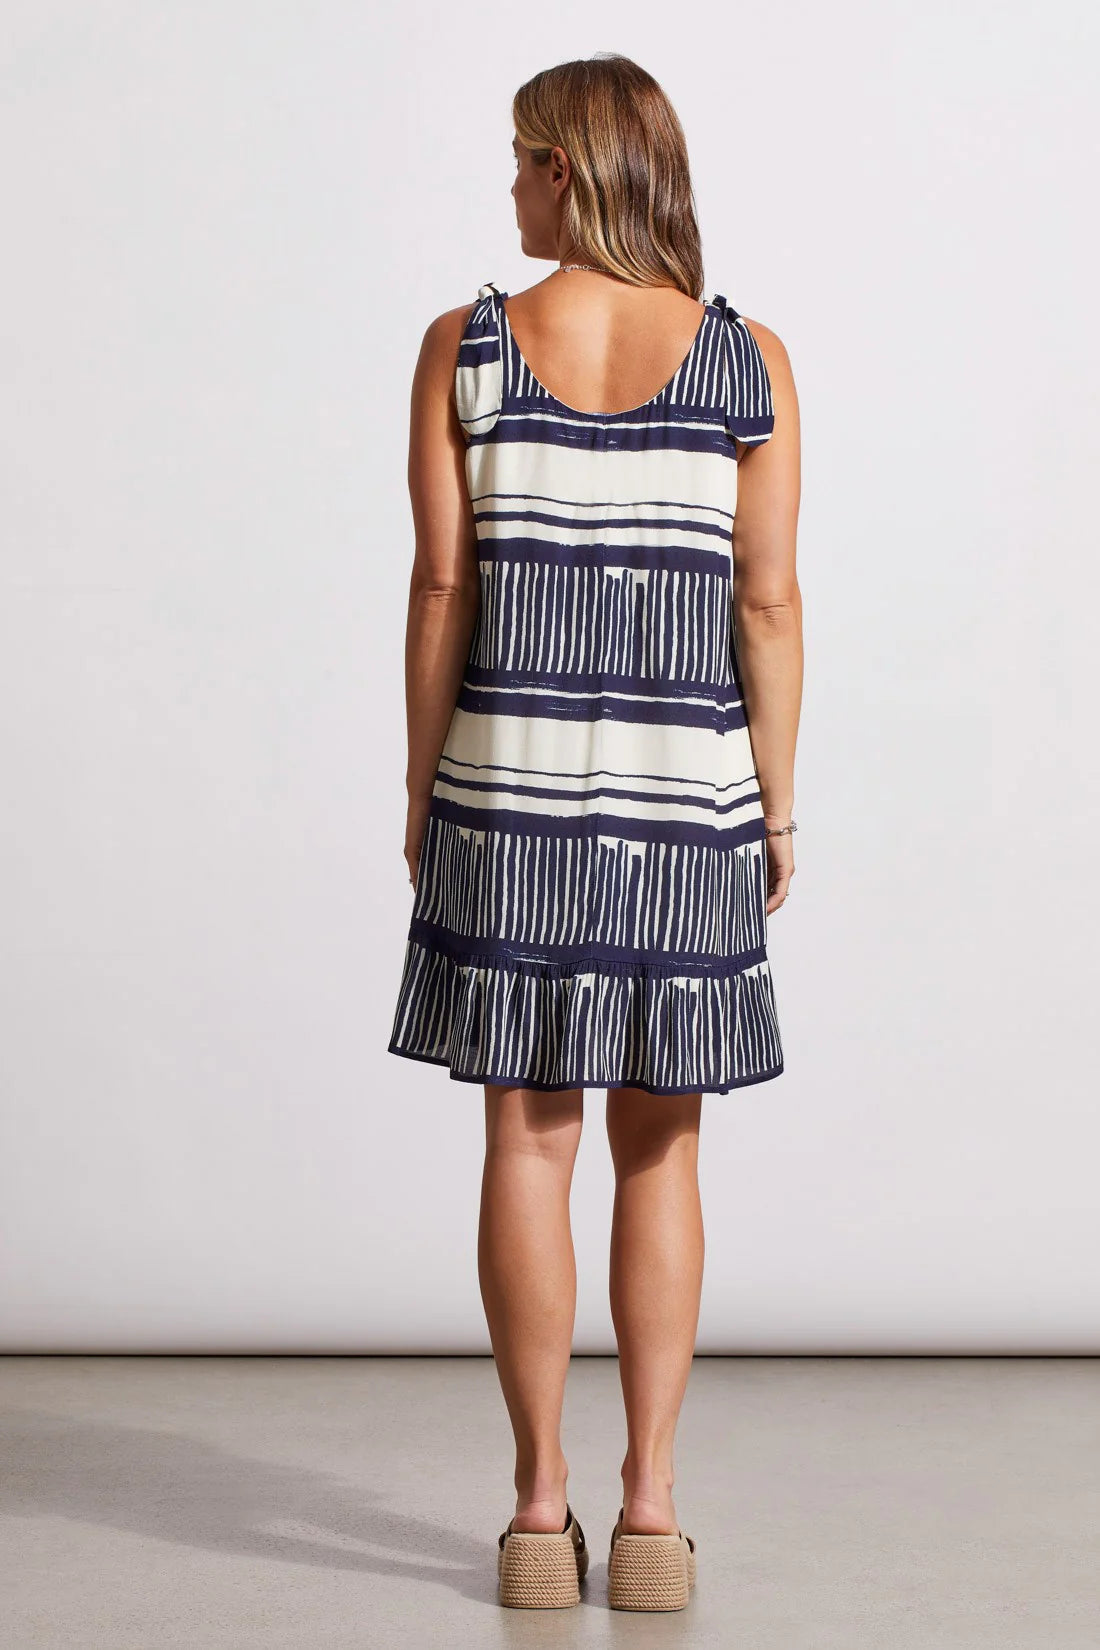 Sleeveless Dress with Shoulder Ties by Tribal